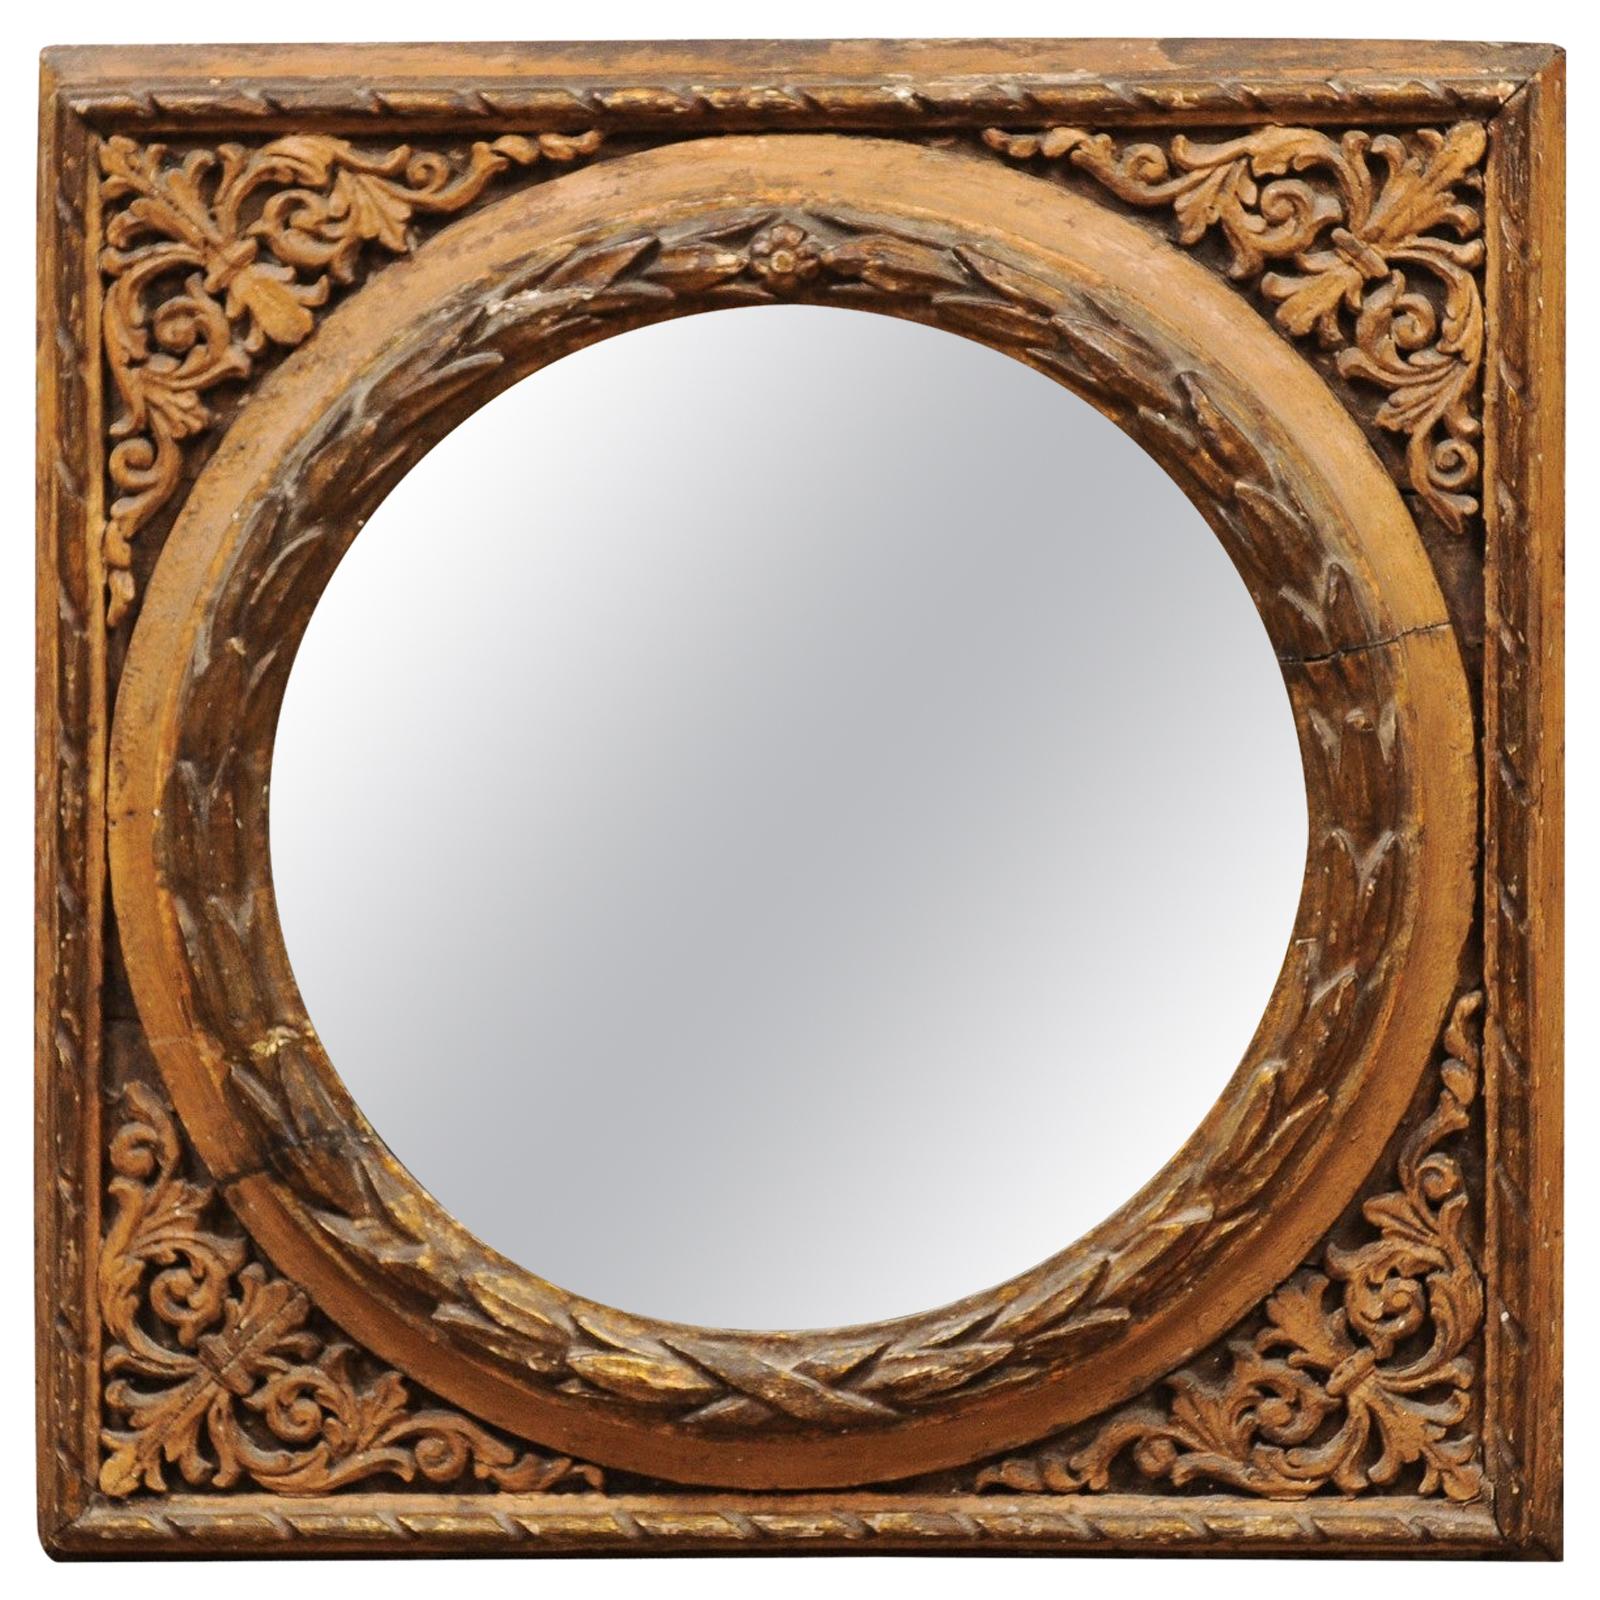 Italian Giltwood Carved Square Frame with Circular Mirror Plate, 19th Century